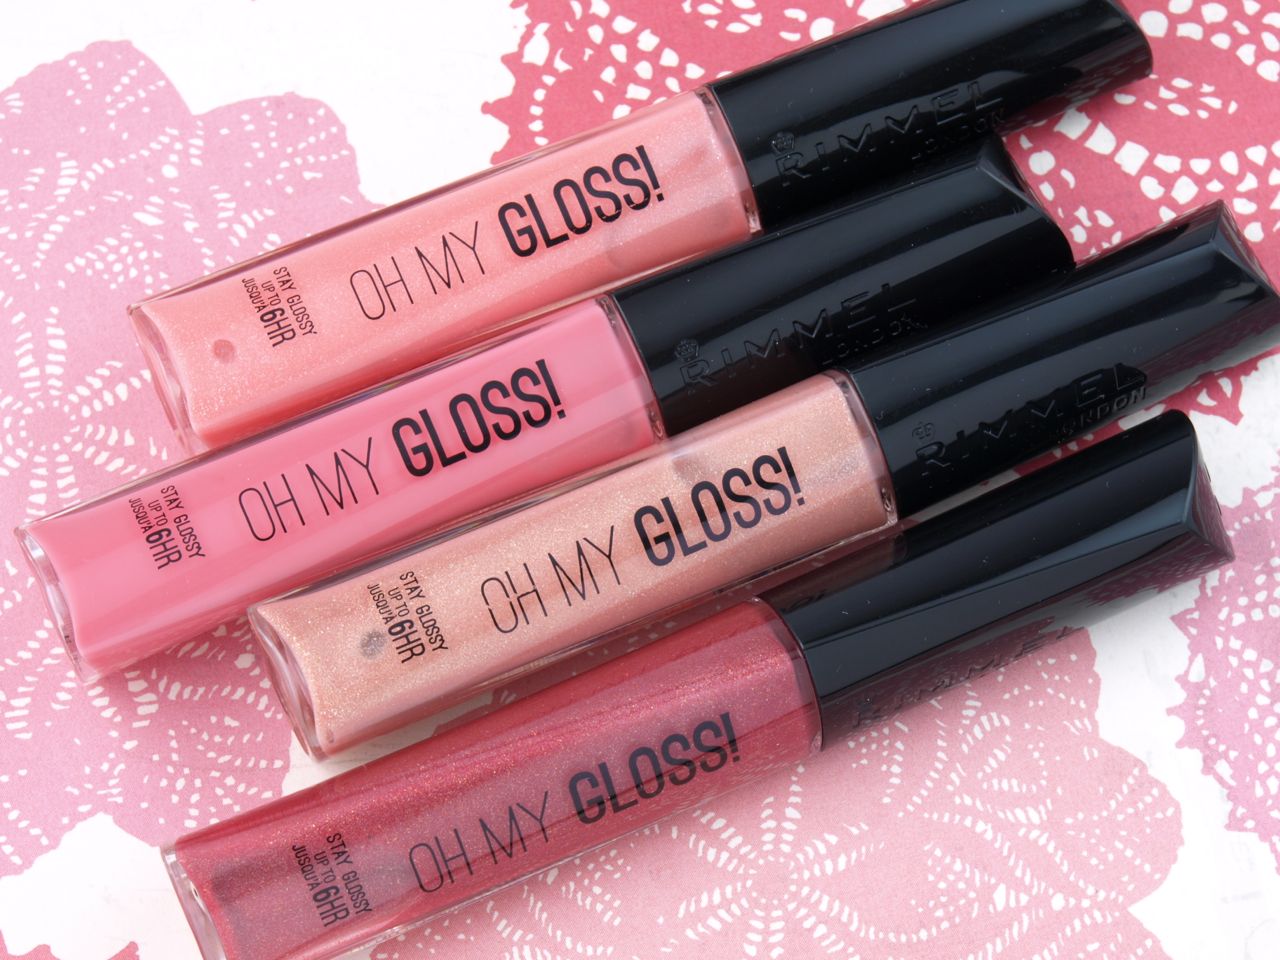 Rimmel London Oh My Gloss! Lip Glosses: Review and Swatches